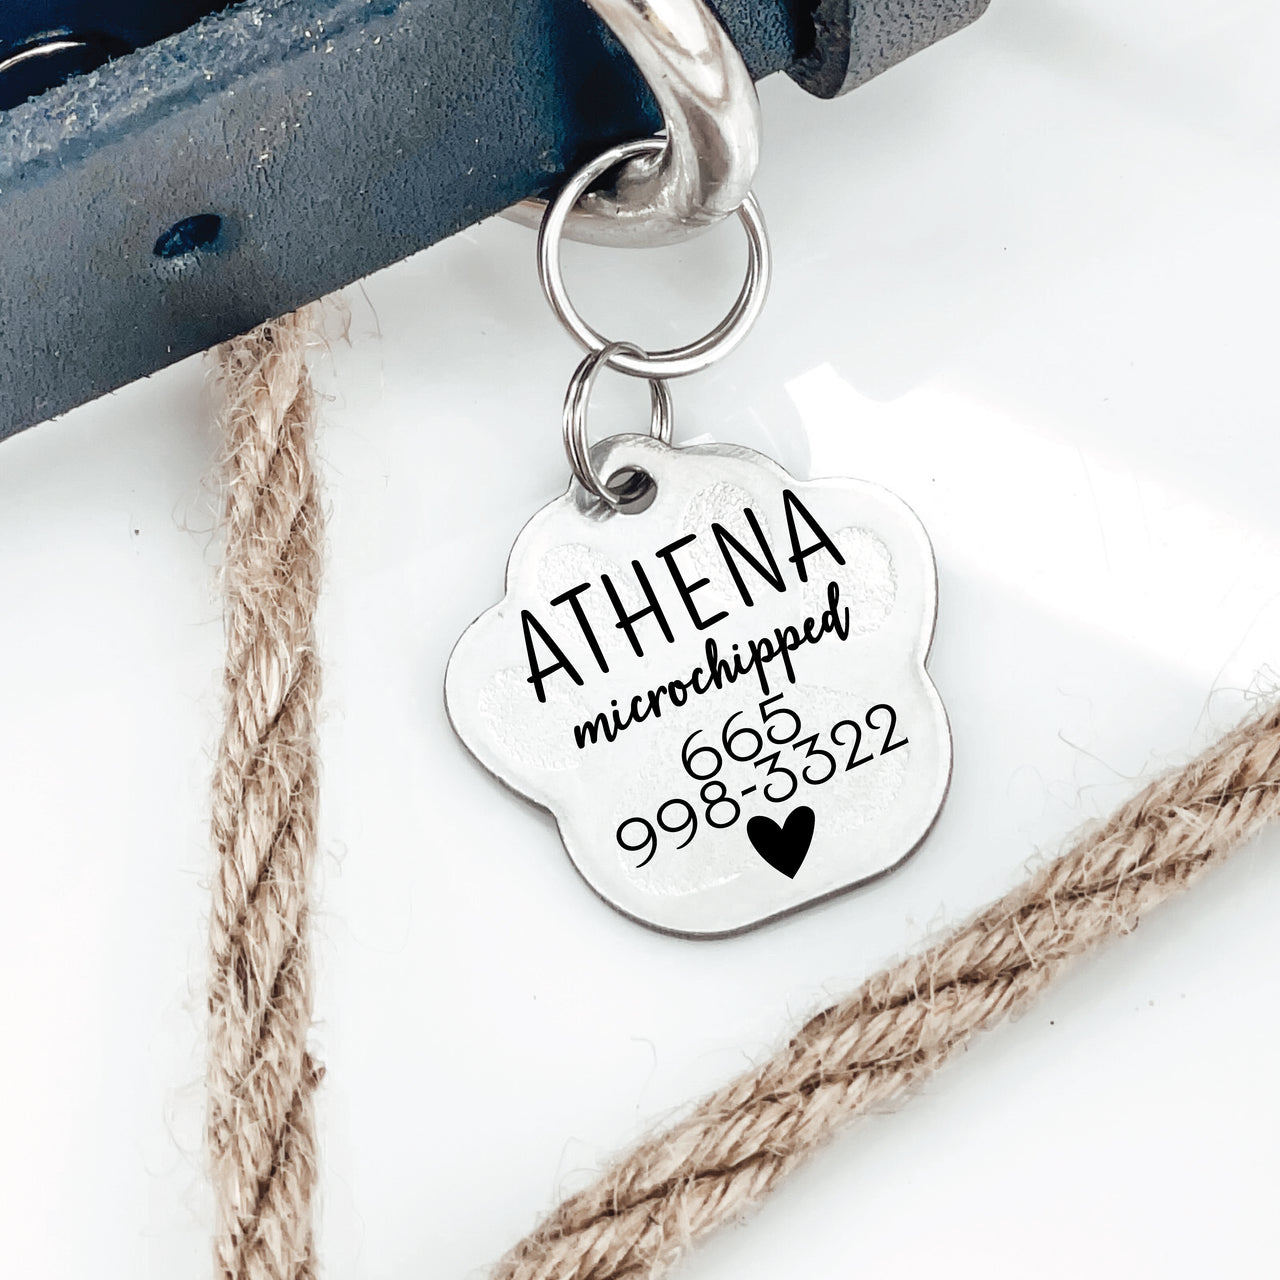 Silver pawprint shaped pet tag joined to collar by two jump rings. Tag has a heart, animal name, phone number and "microchipped" engraved on it.